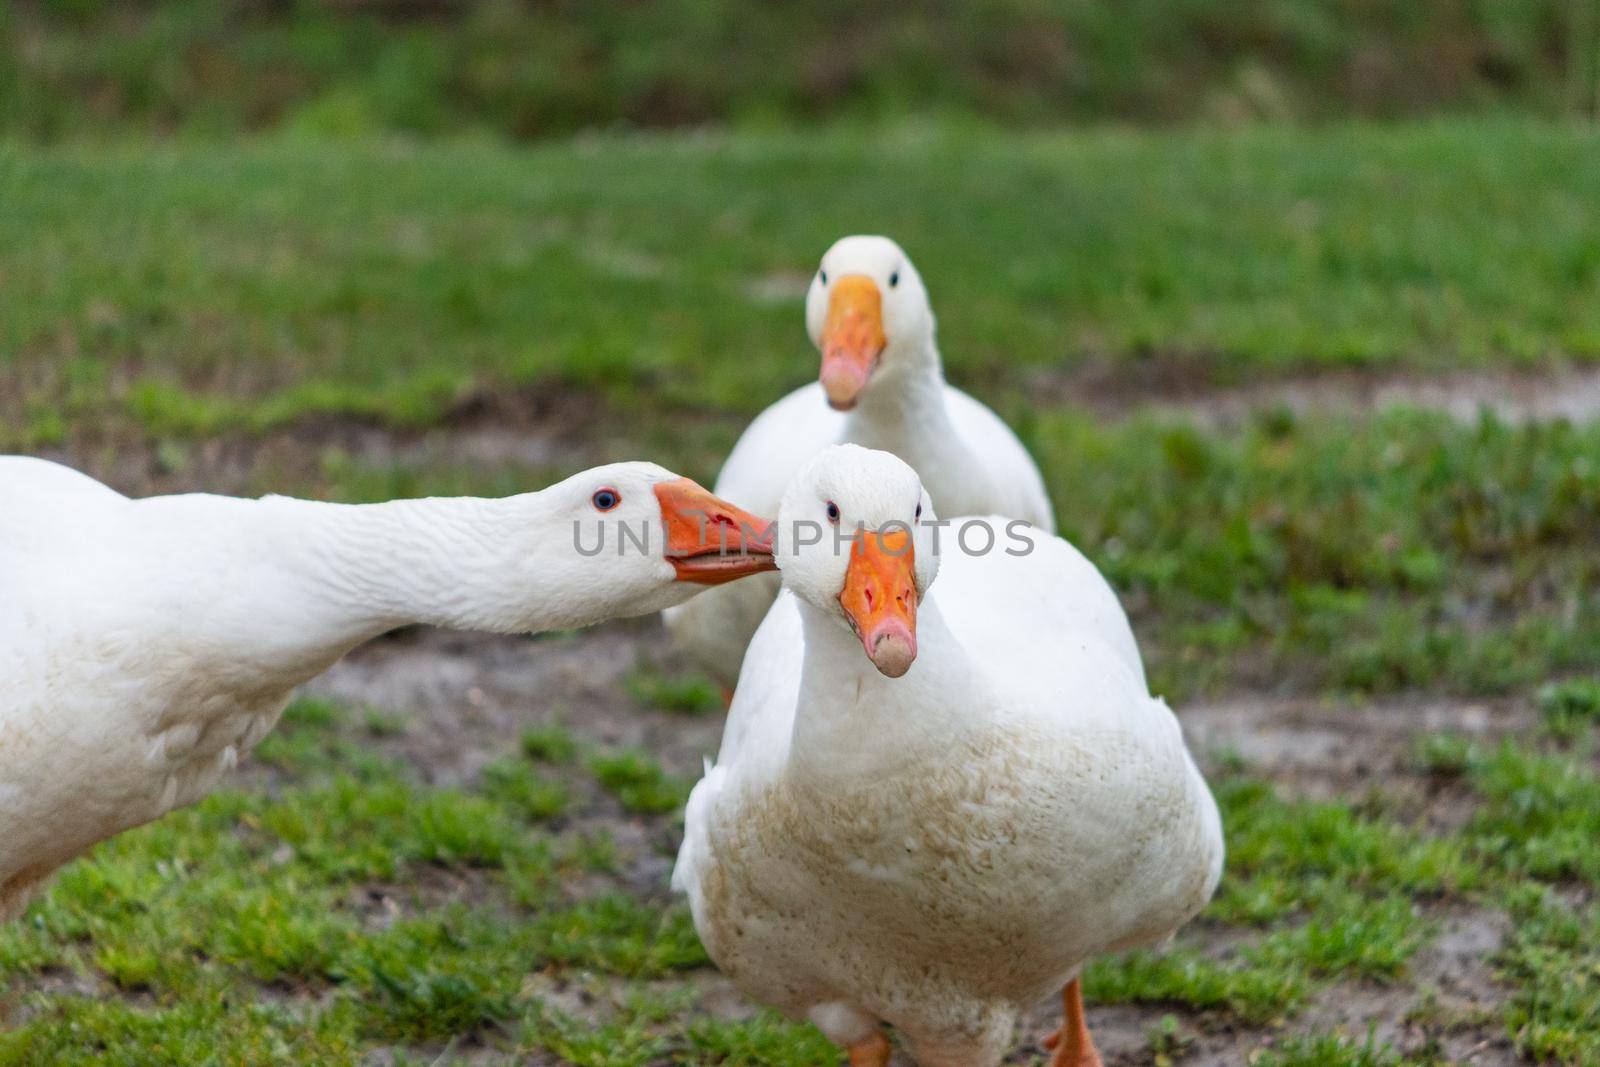 Domestic goose appears to be whispering in the ear to a similar, large group of white birds